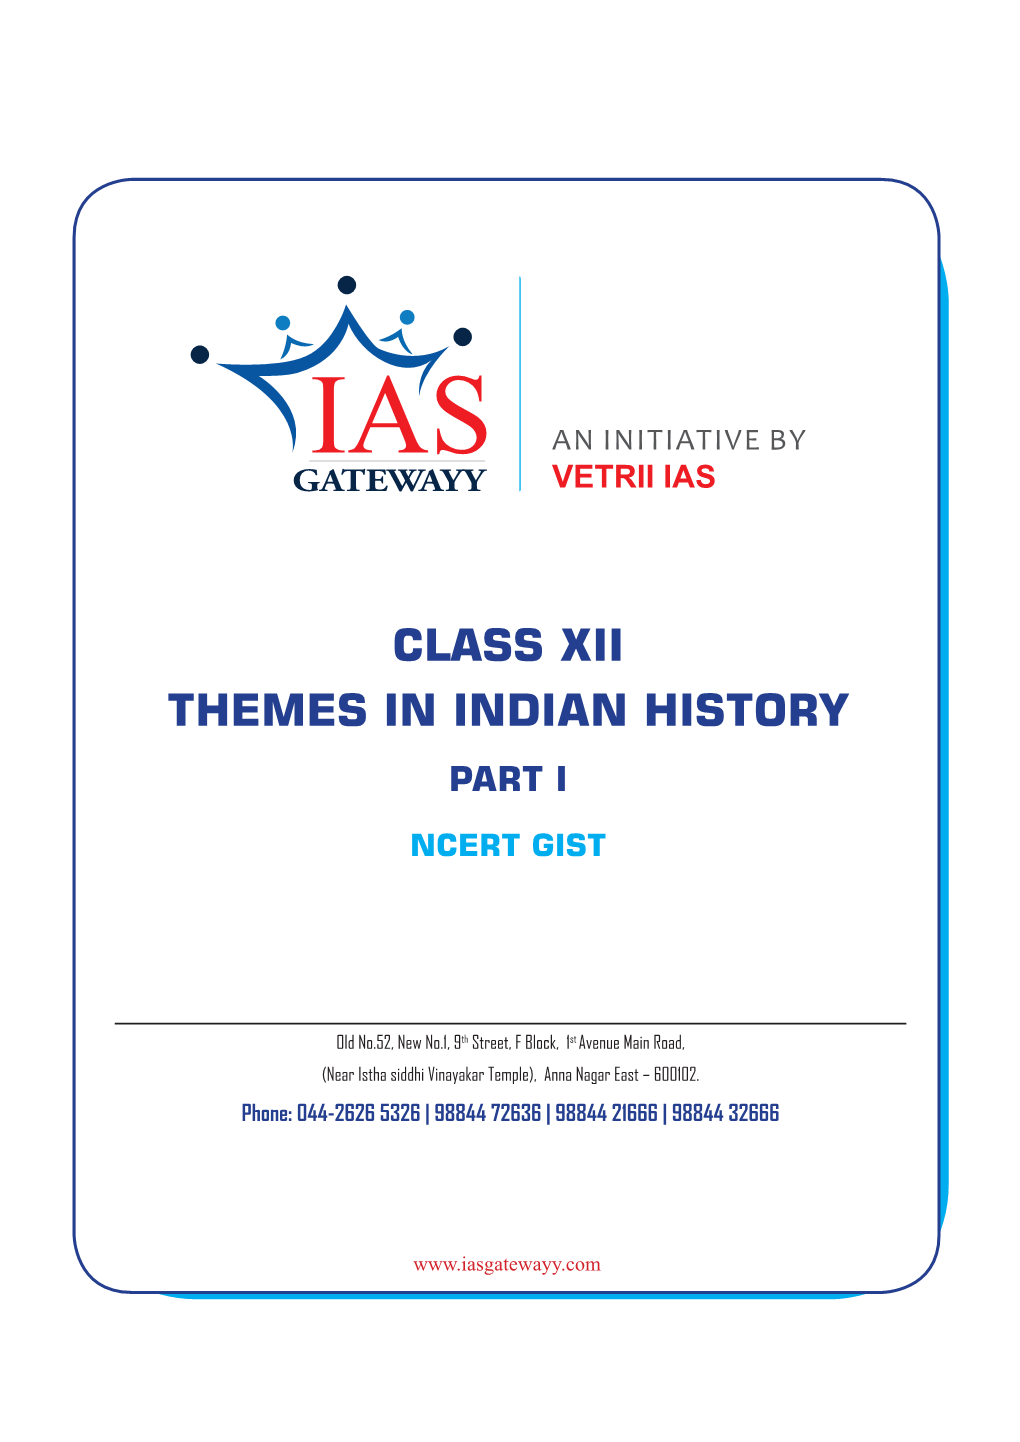 Class Xii Themes in Indian History Part I